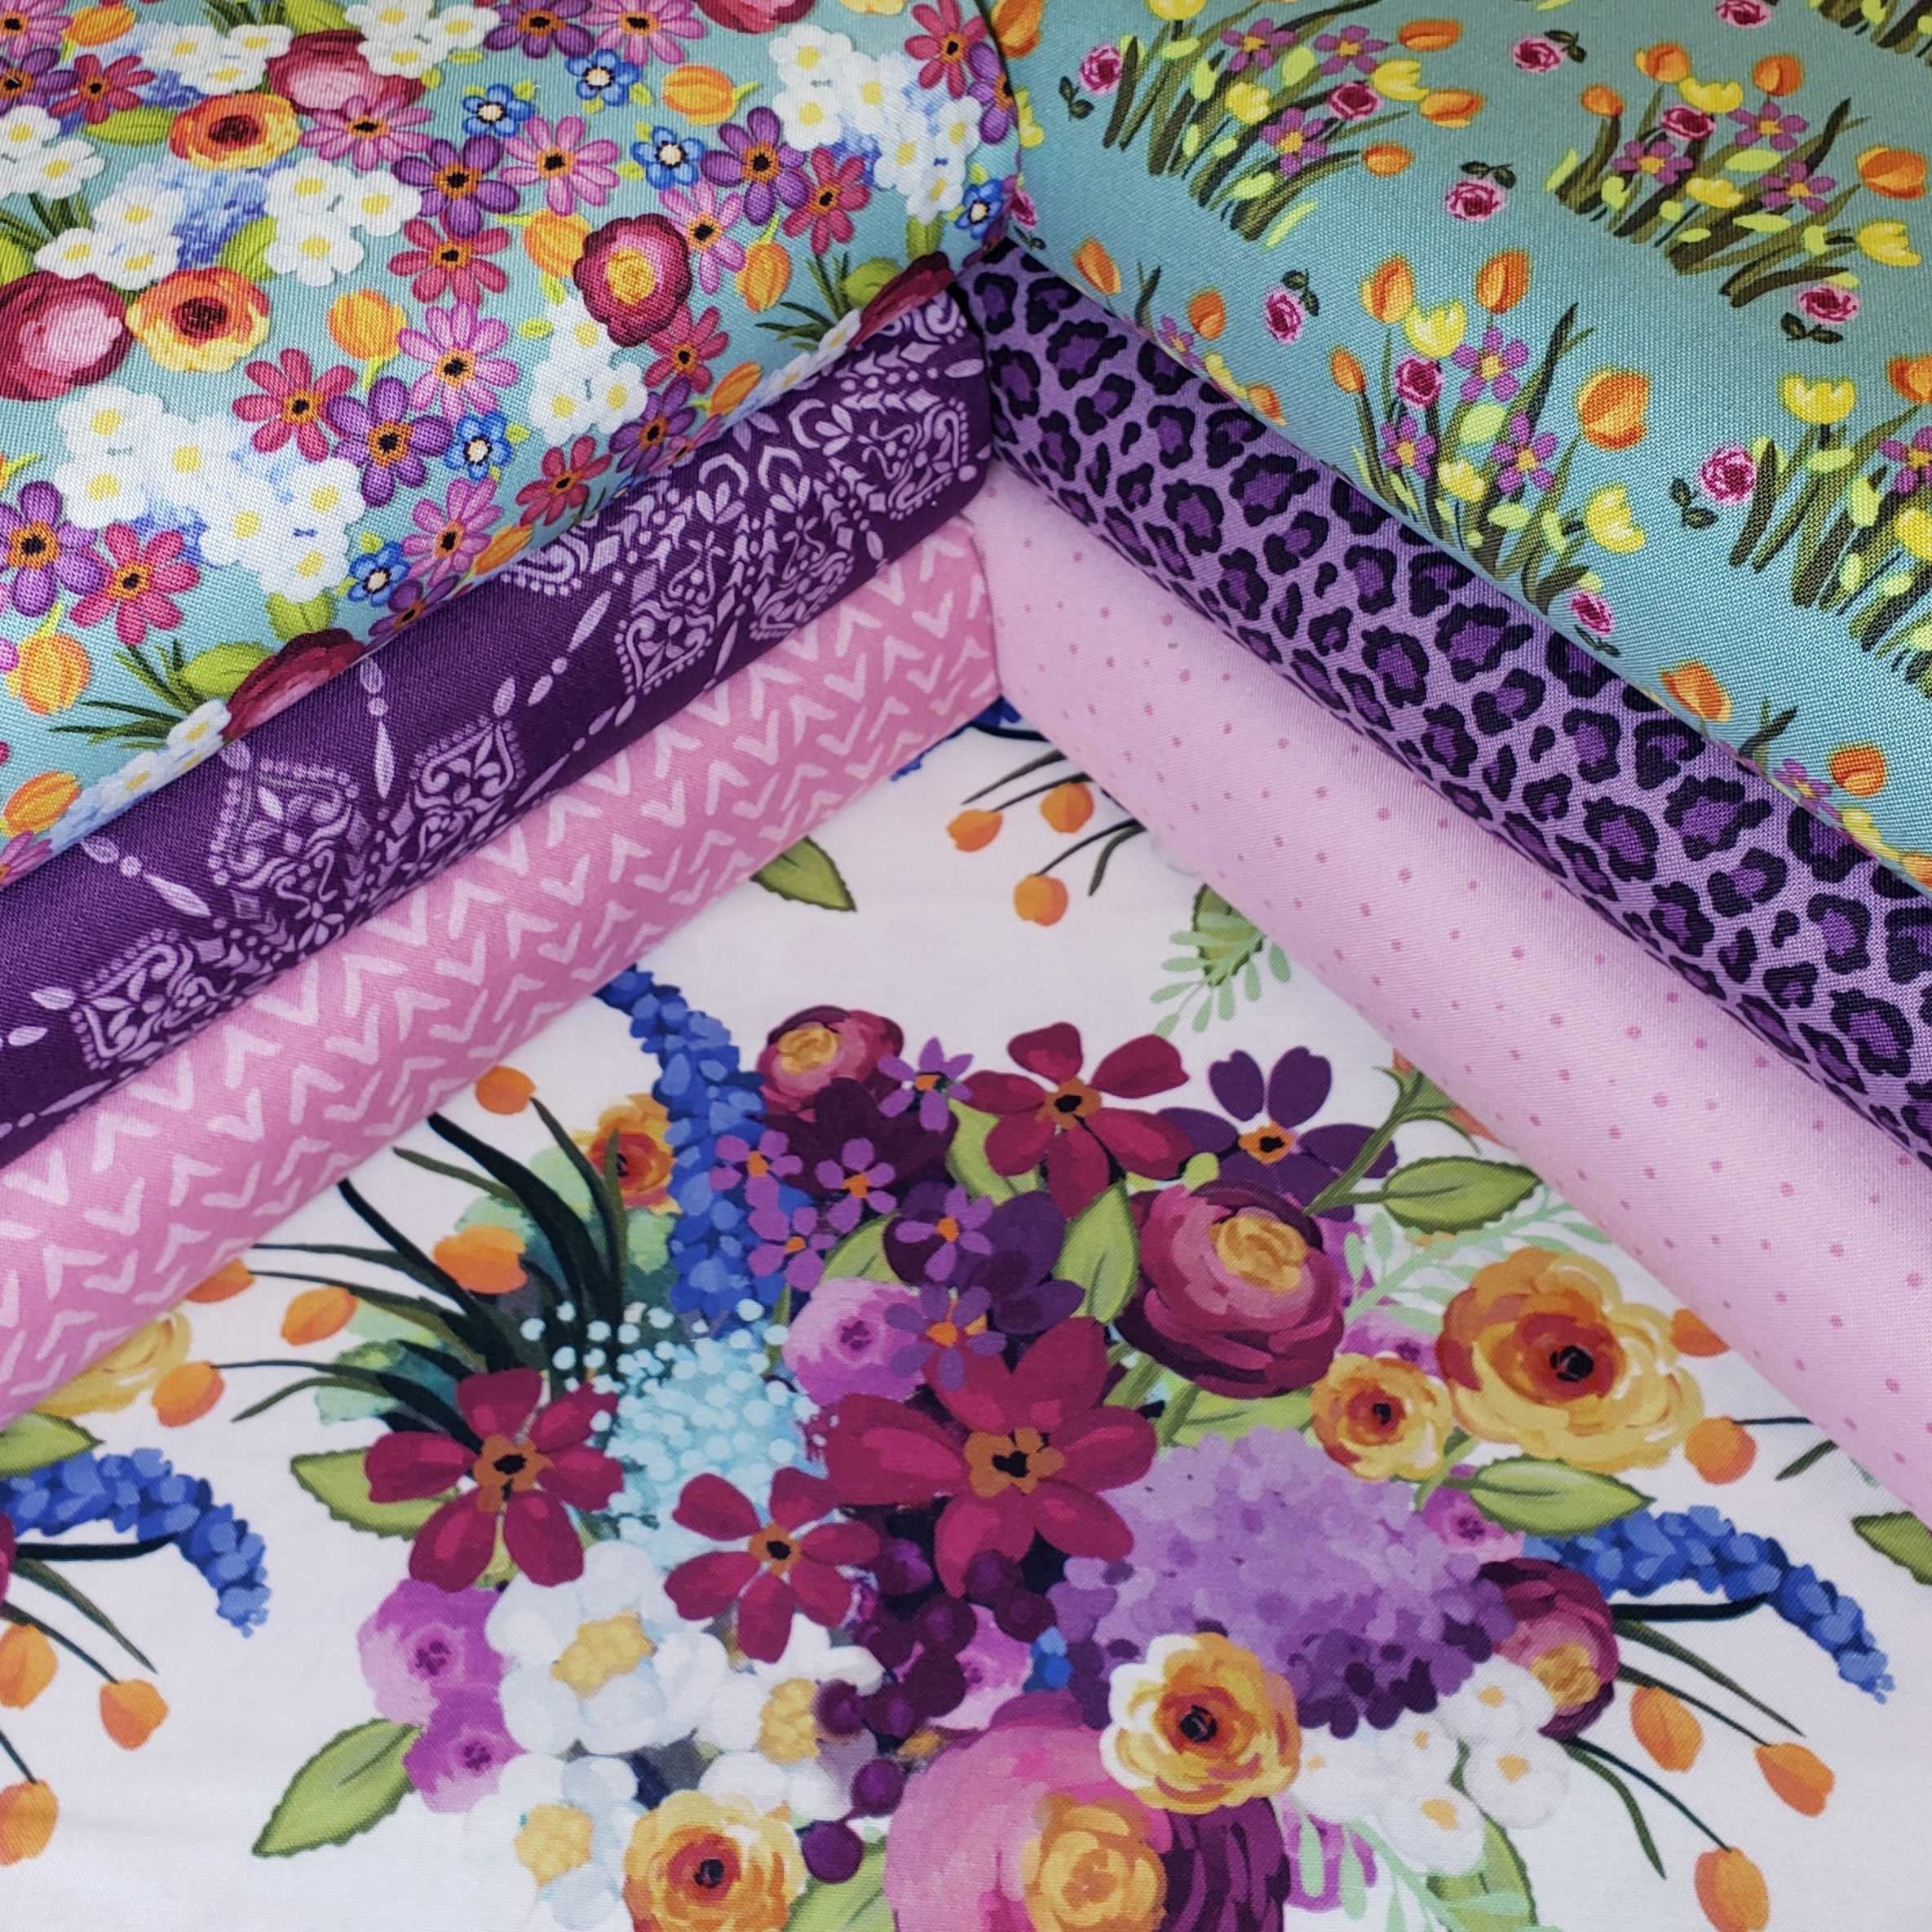 Floralicious Lilac Floral Stems Fabric by Lila Tueller - Riley Blake  Fabrics